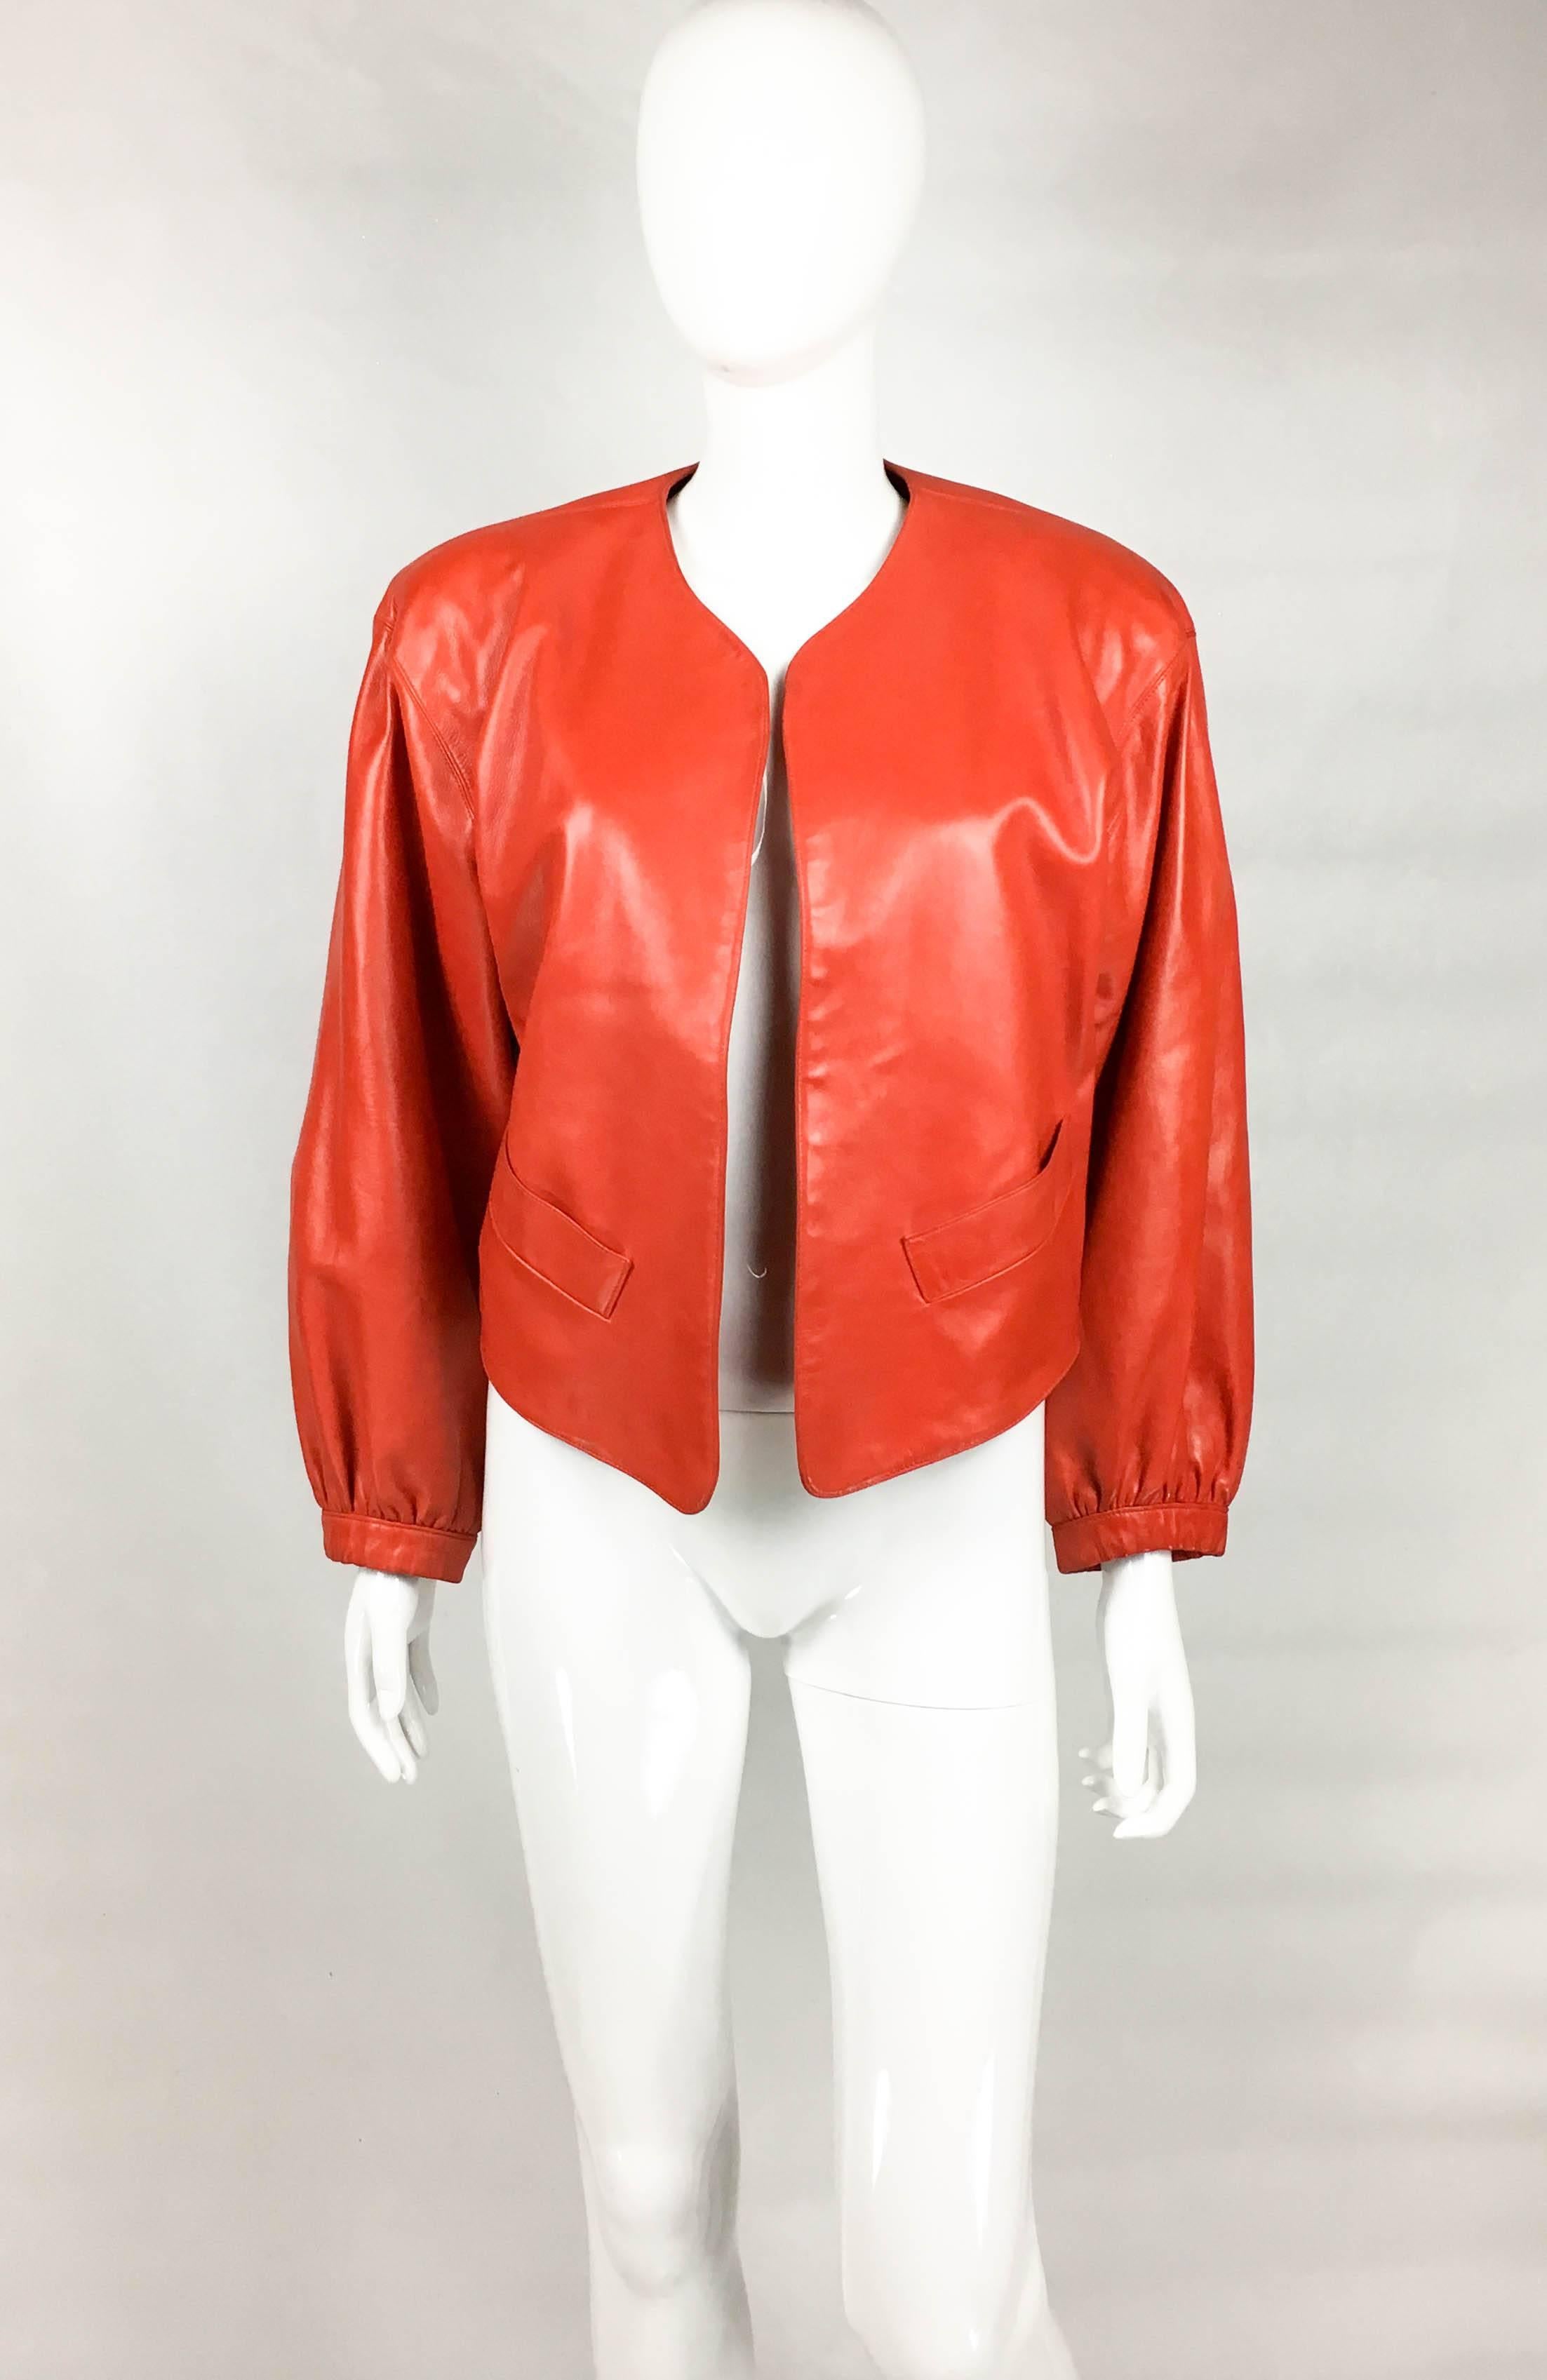 Vintage Yves Saint Laurent Red Leather Jacket. This gorgeous piece by Yves Saint Laurent dates back from the 1980’s. Crafted in butter soft red leather, it features voluminous sleeves and cropped back. There is no closure to the front, allowing for